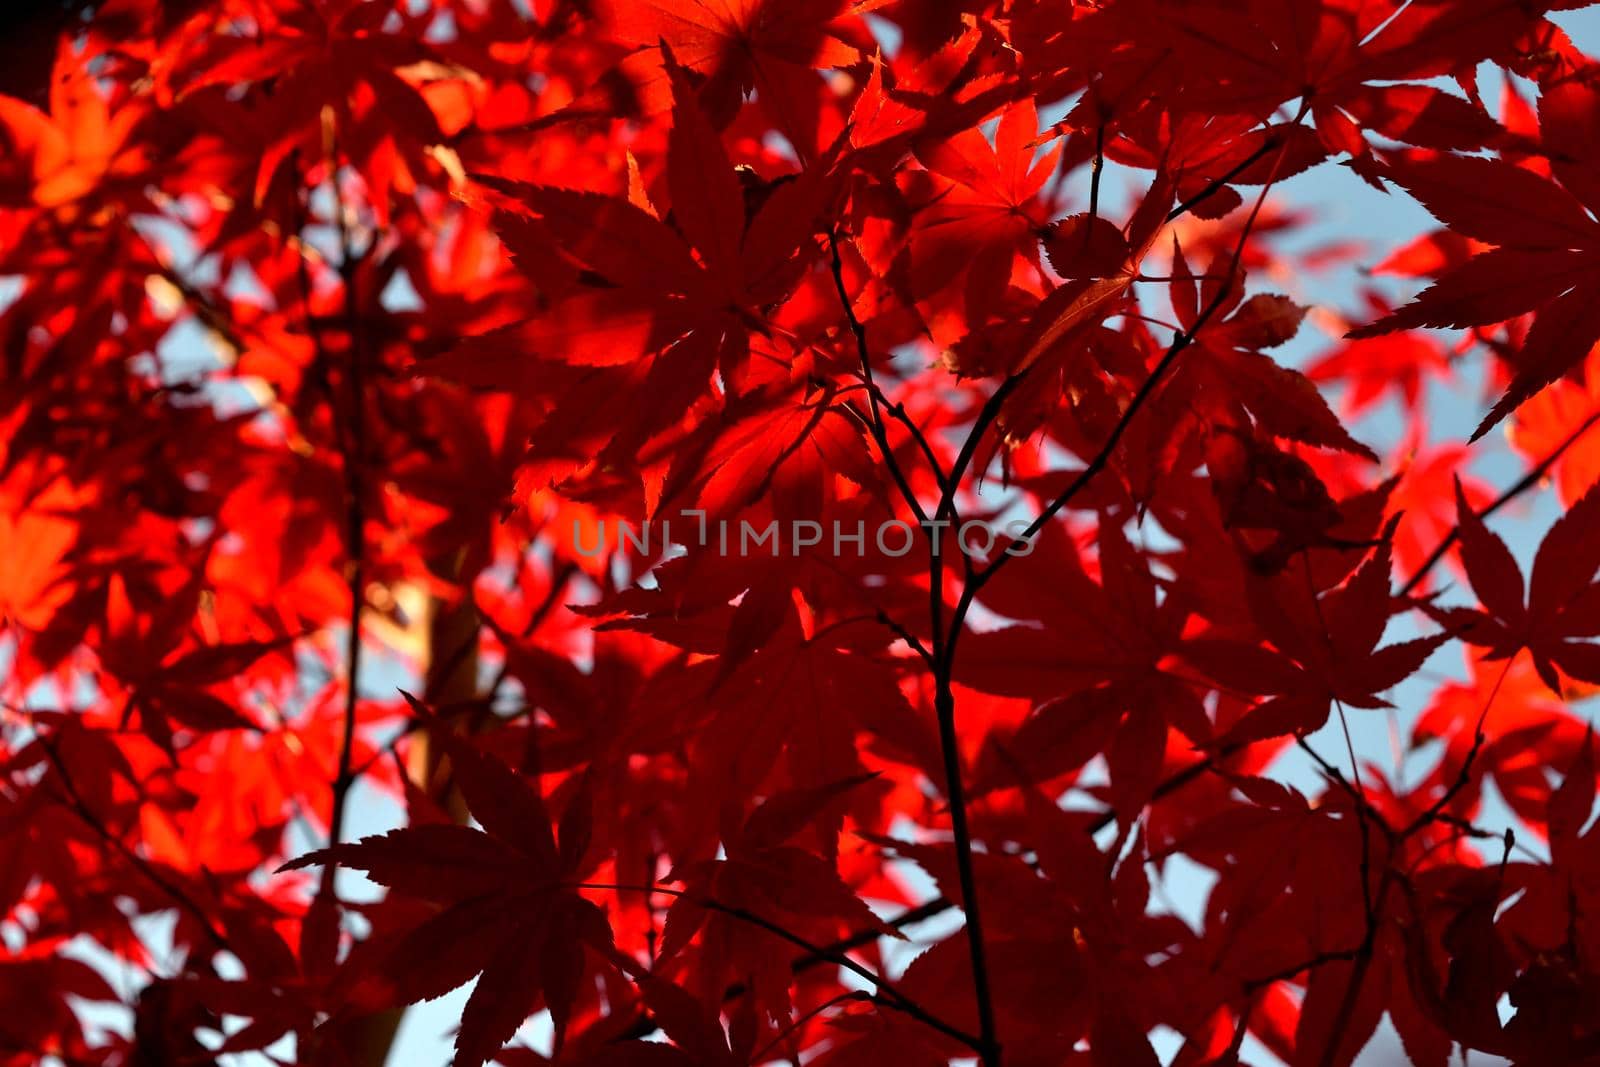 Close up of Japanese palmate maple with its distinctive red leaves during the fall season.